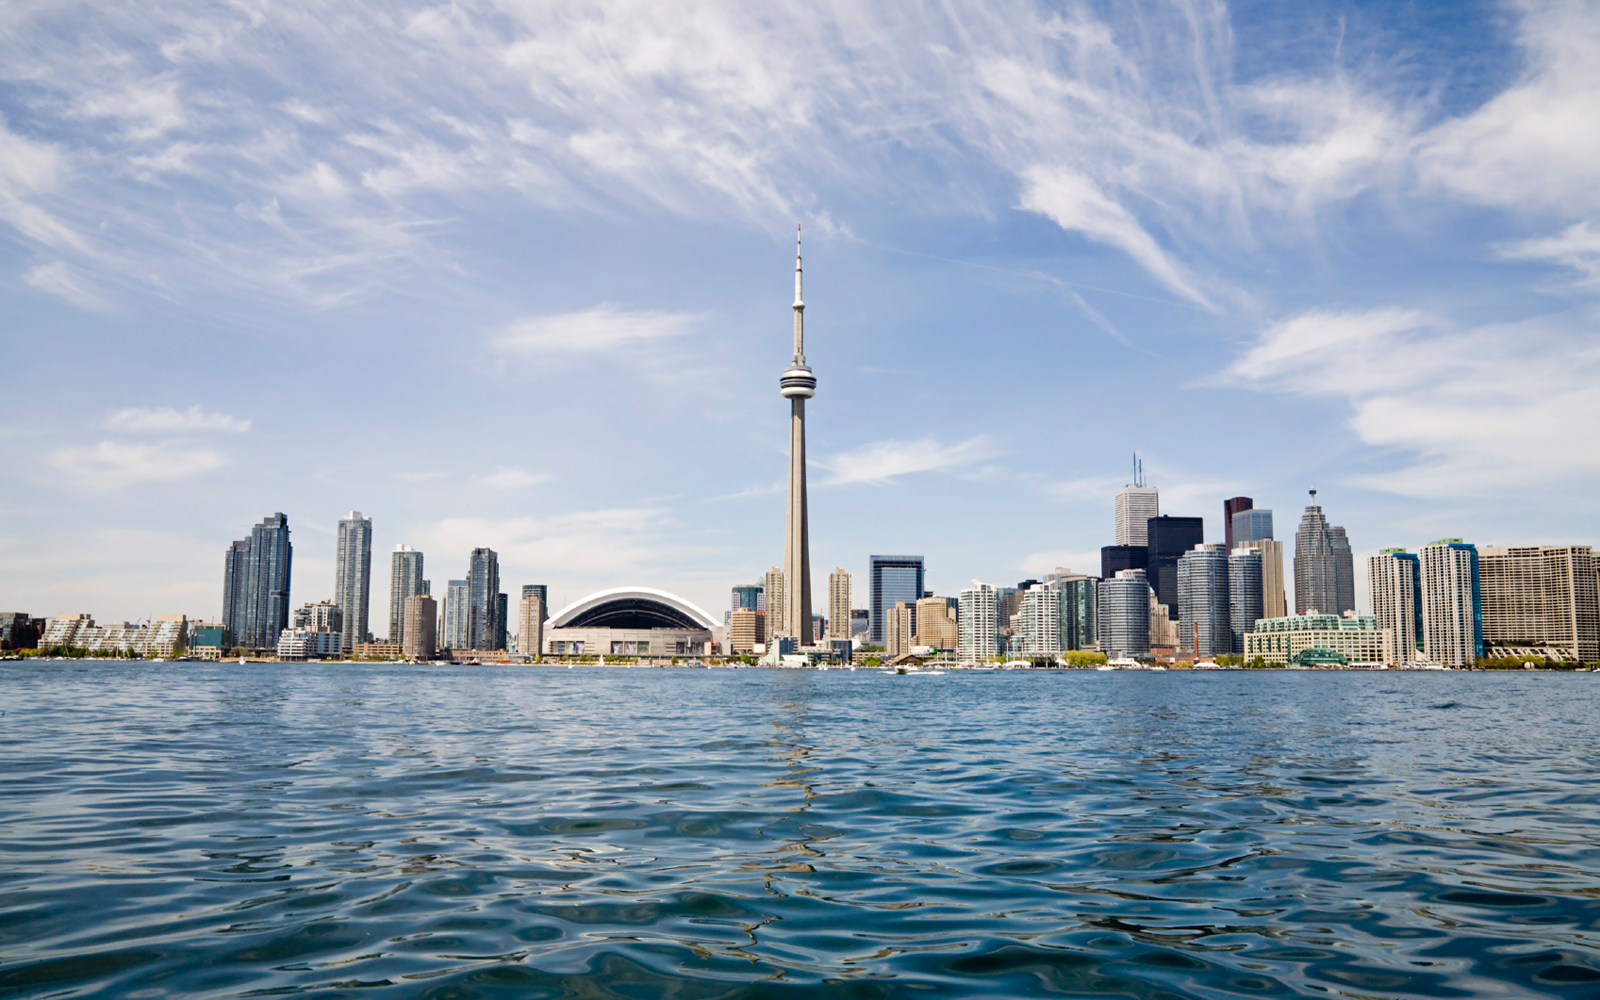 Google versus Toronto – Is there a win for sustainability?